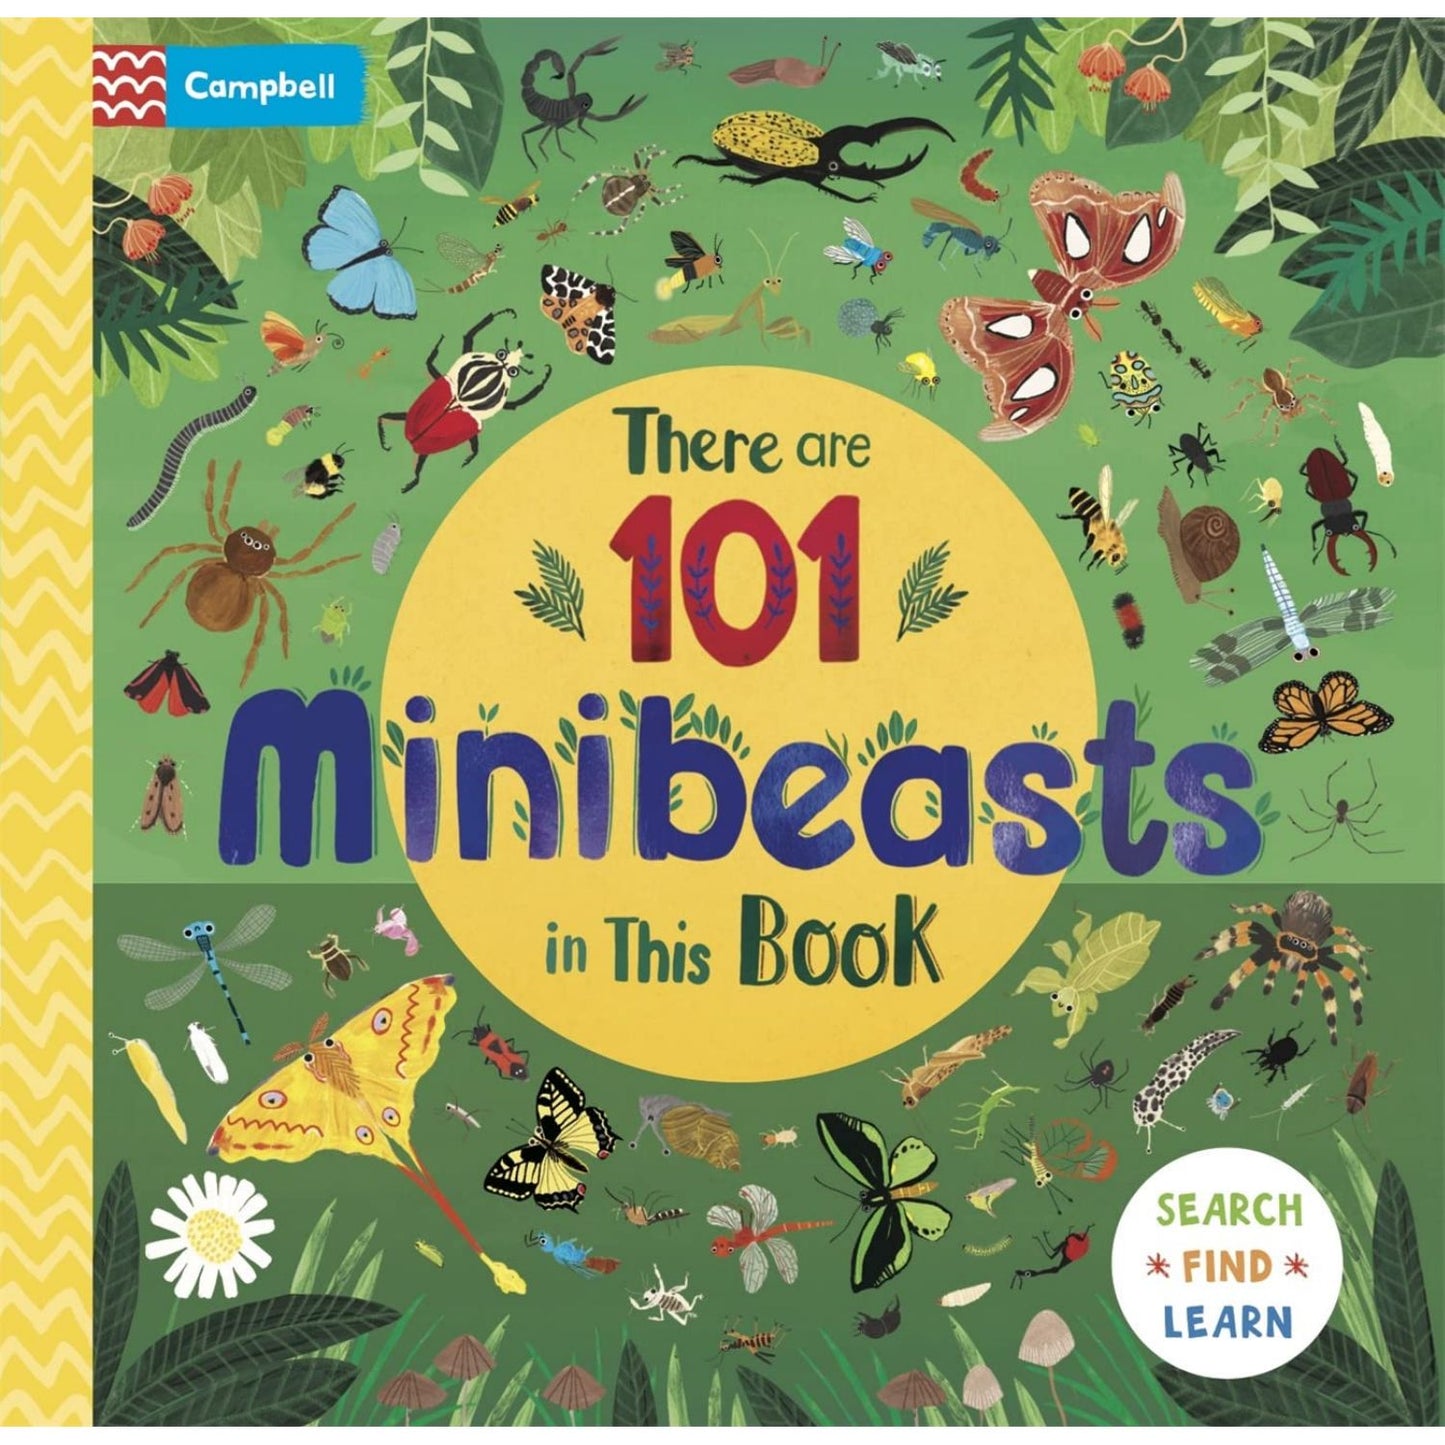 There are 101 Minibeasts in This Book | Children's Board Book on Animals